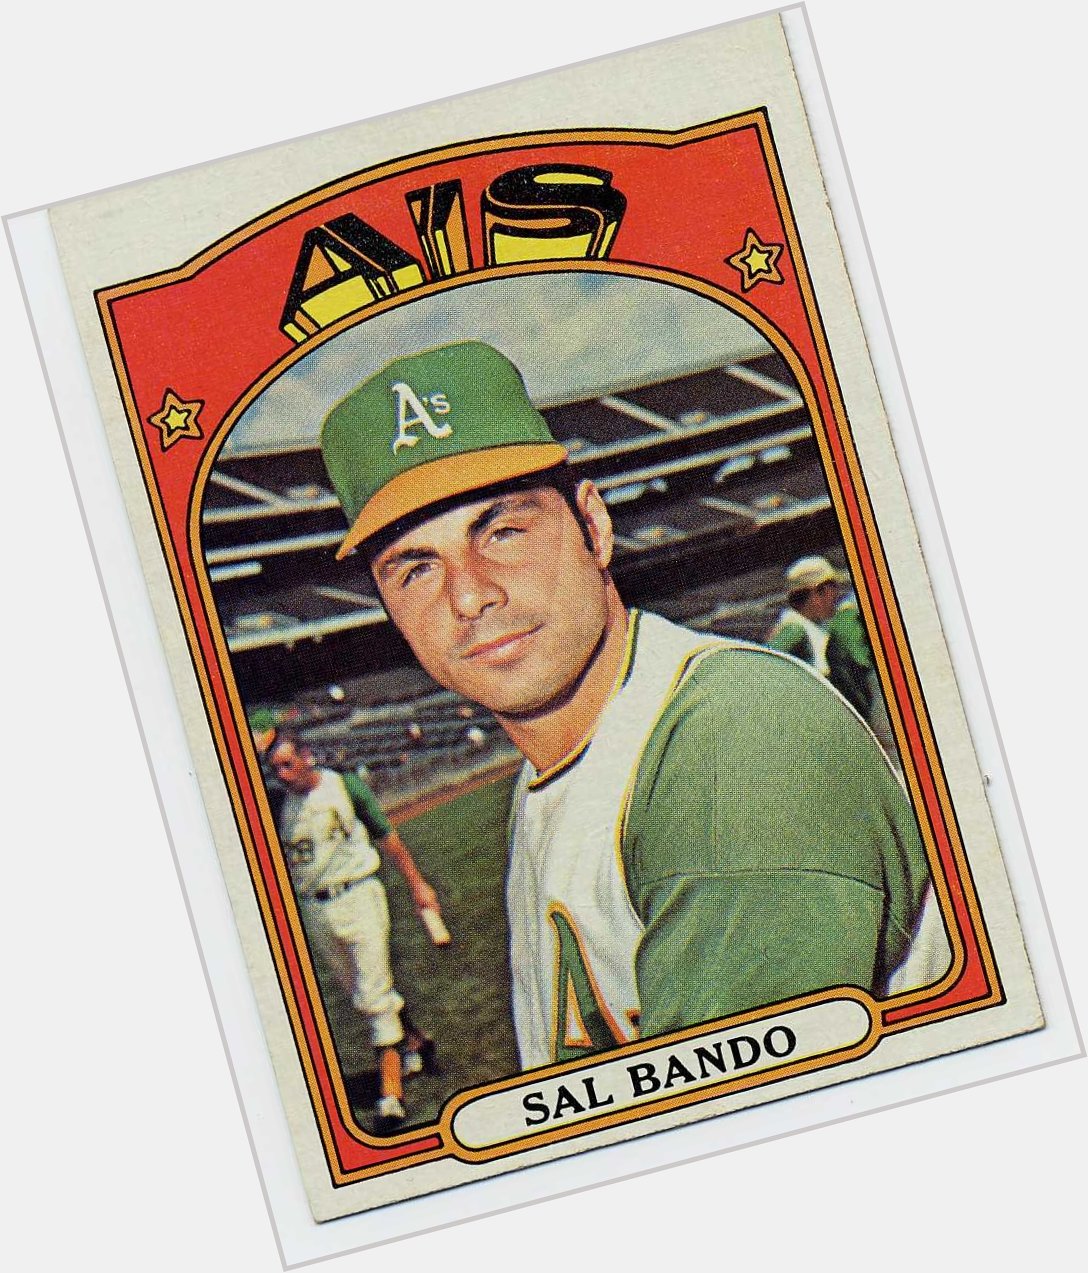 A happy 73rd birthday to Hall of Stats member Sal Bando!  